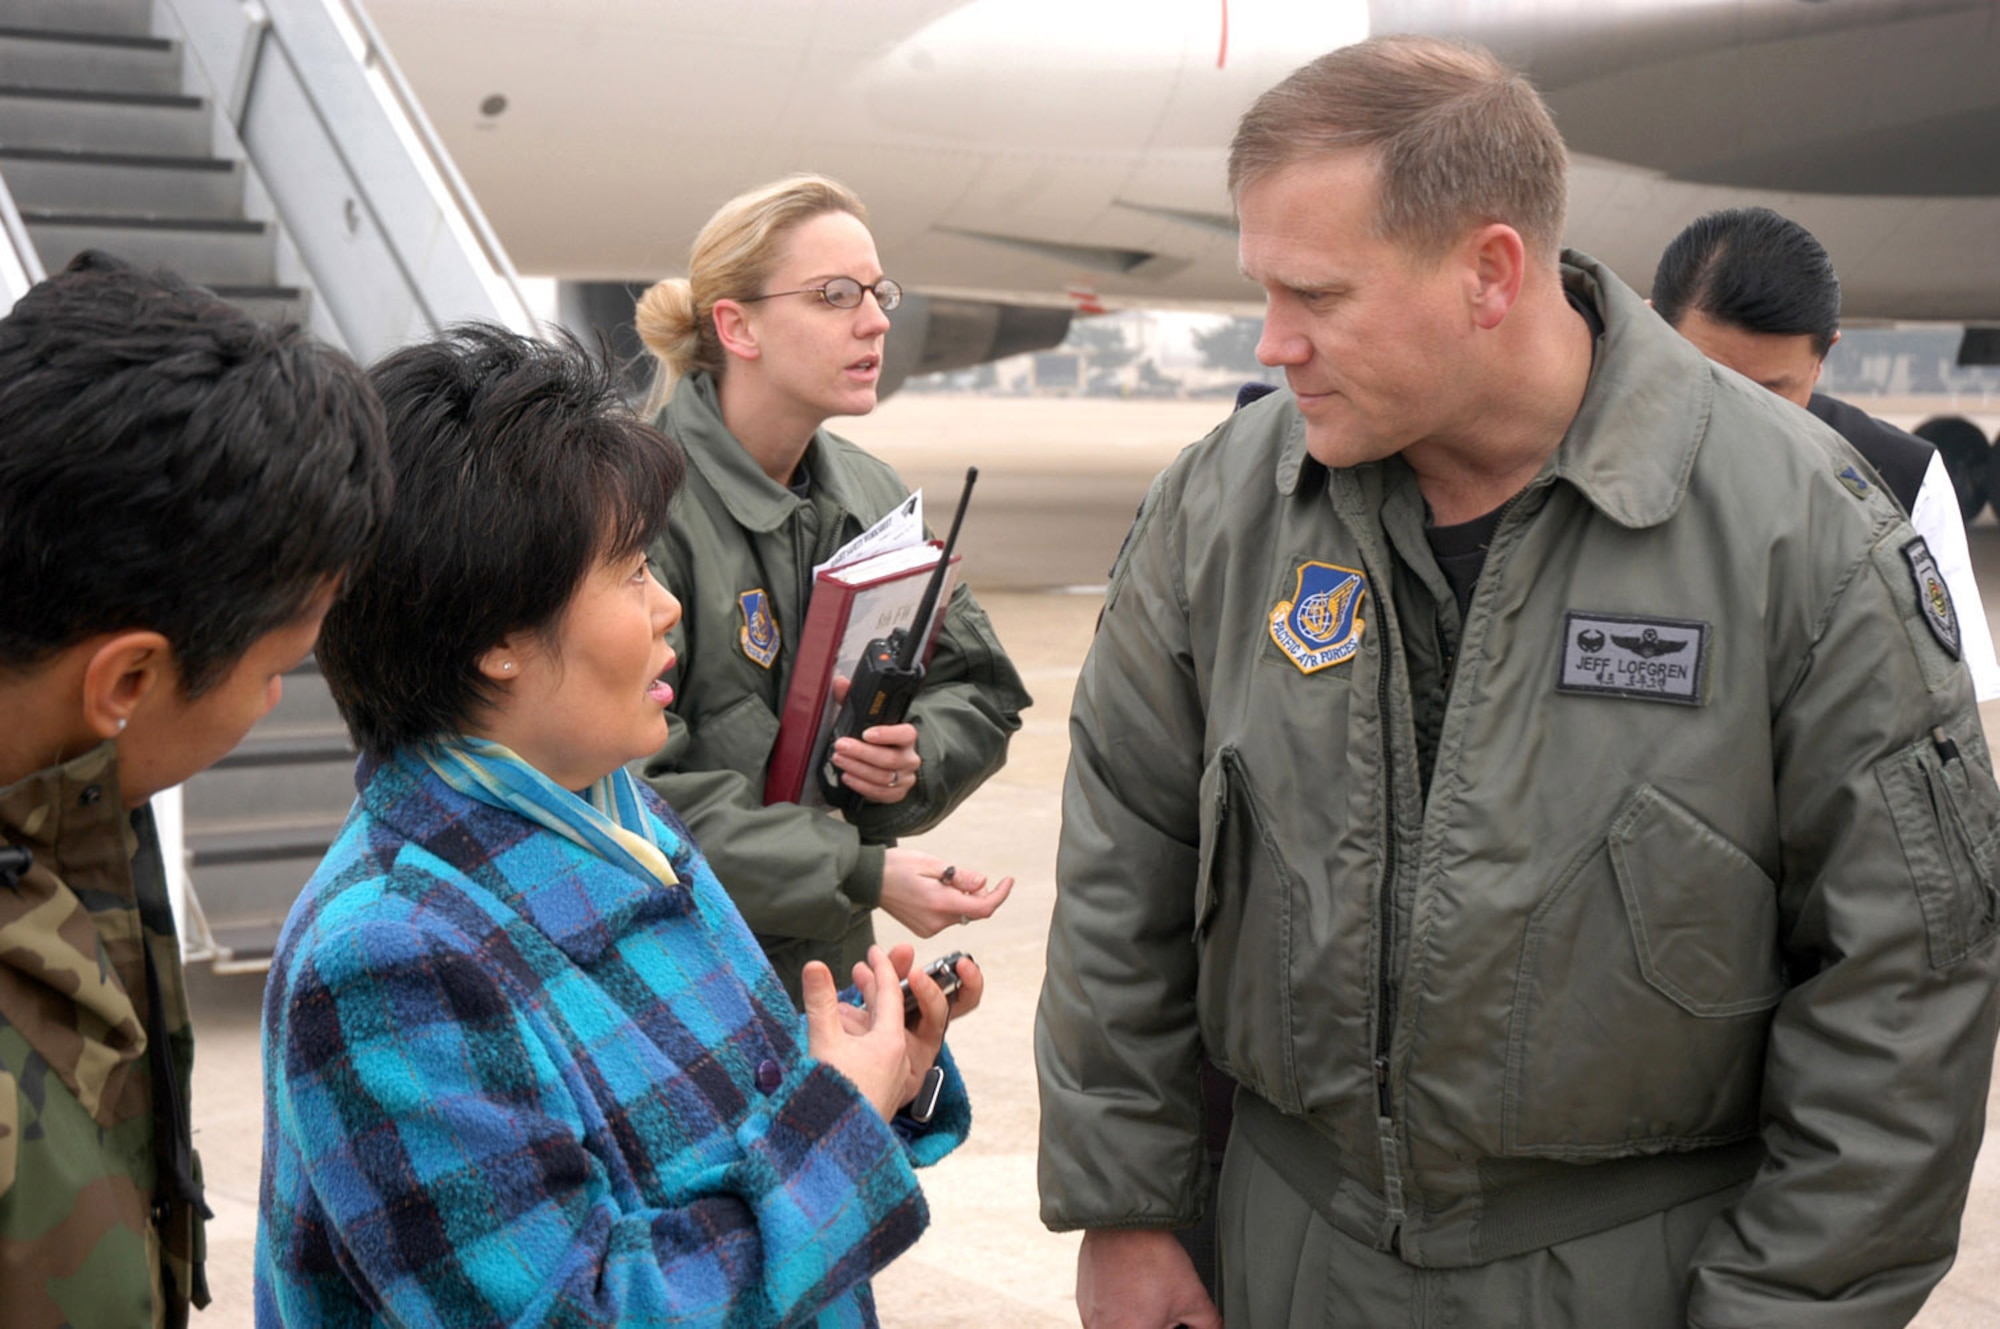 Col. Jeff Lofgren, 8th Fighter Wing commander, talks with airfield operations personnel after two Korean Airline 747s diverted to Kunsan Air Base, South Korea, from Incheon International Airport because of foggy weather conditions. Medical and security personnel also responded to the aircraft. (U.S. Air Force photo/Staff Sgt. Nathan Gallahan) 